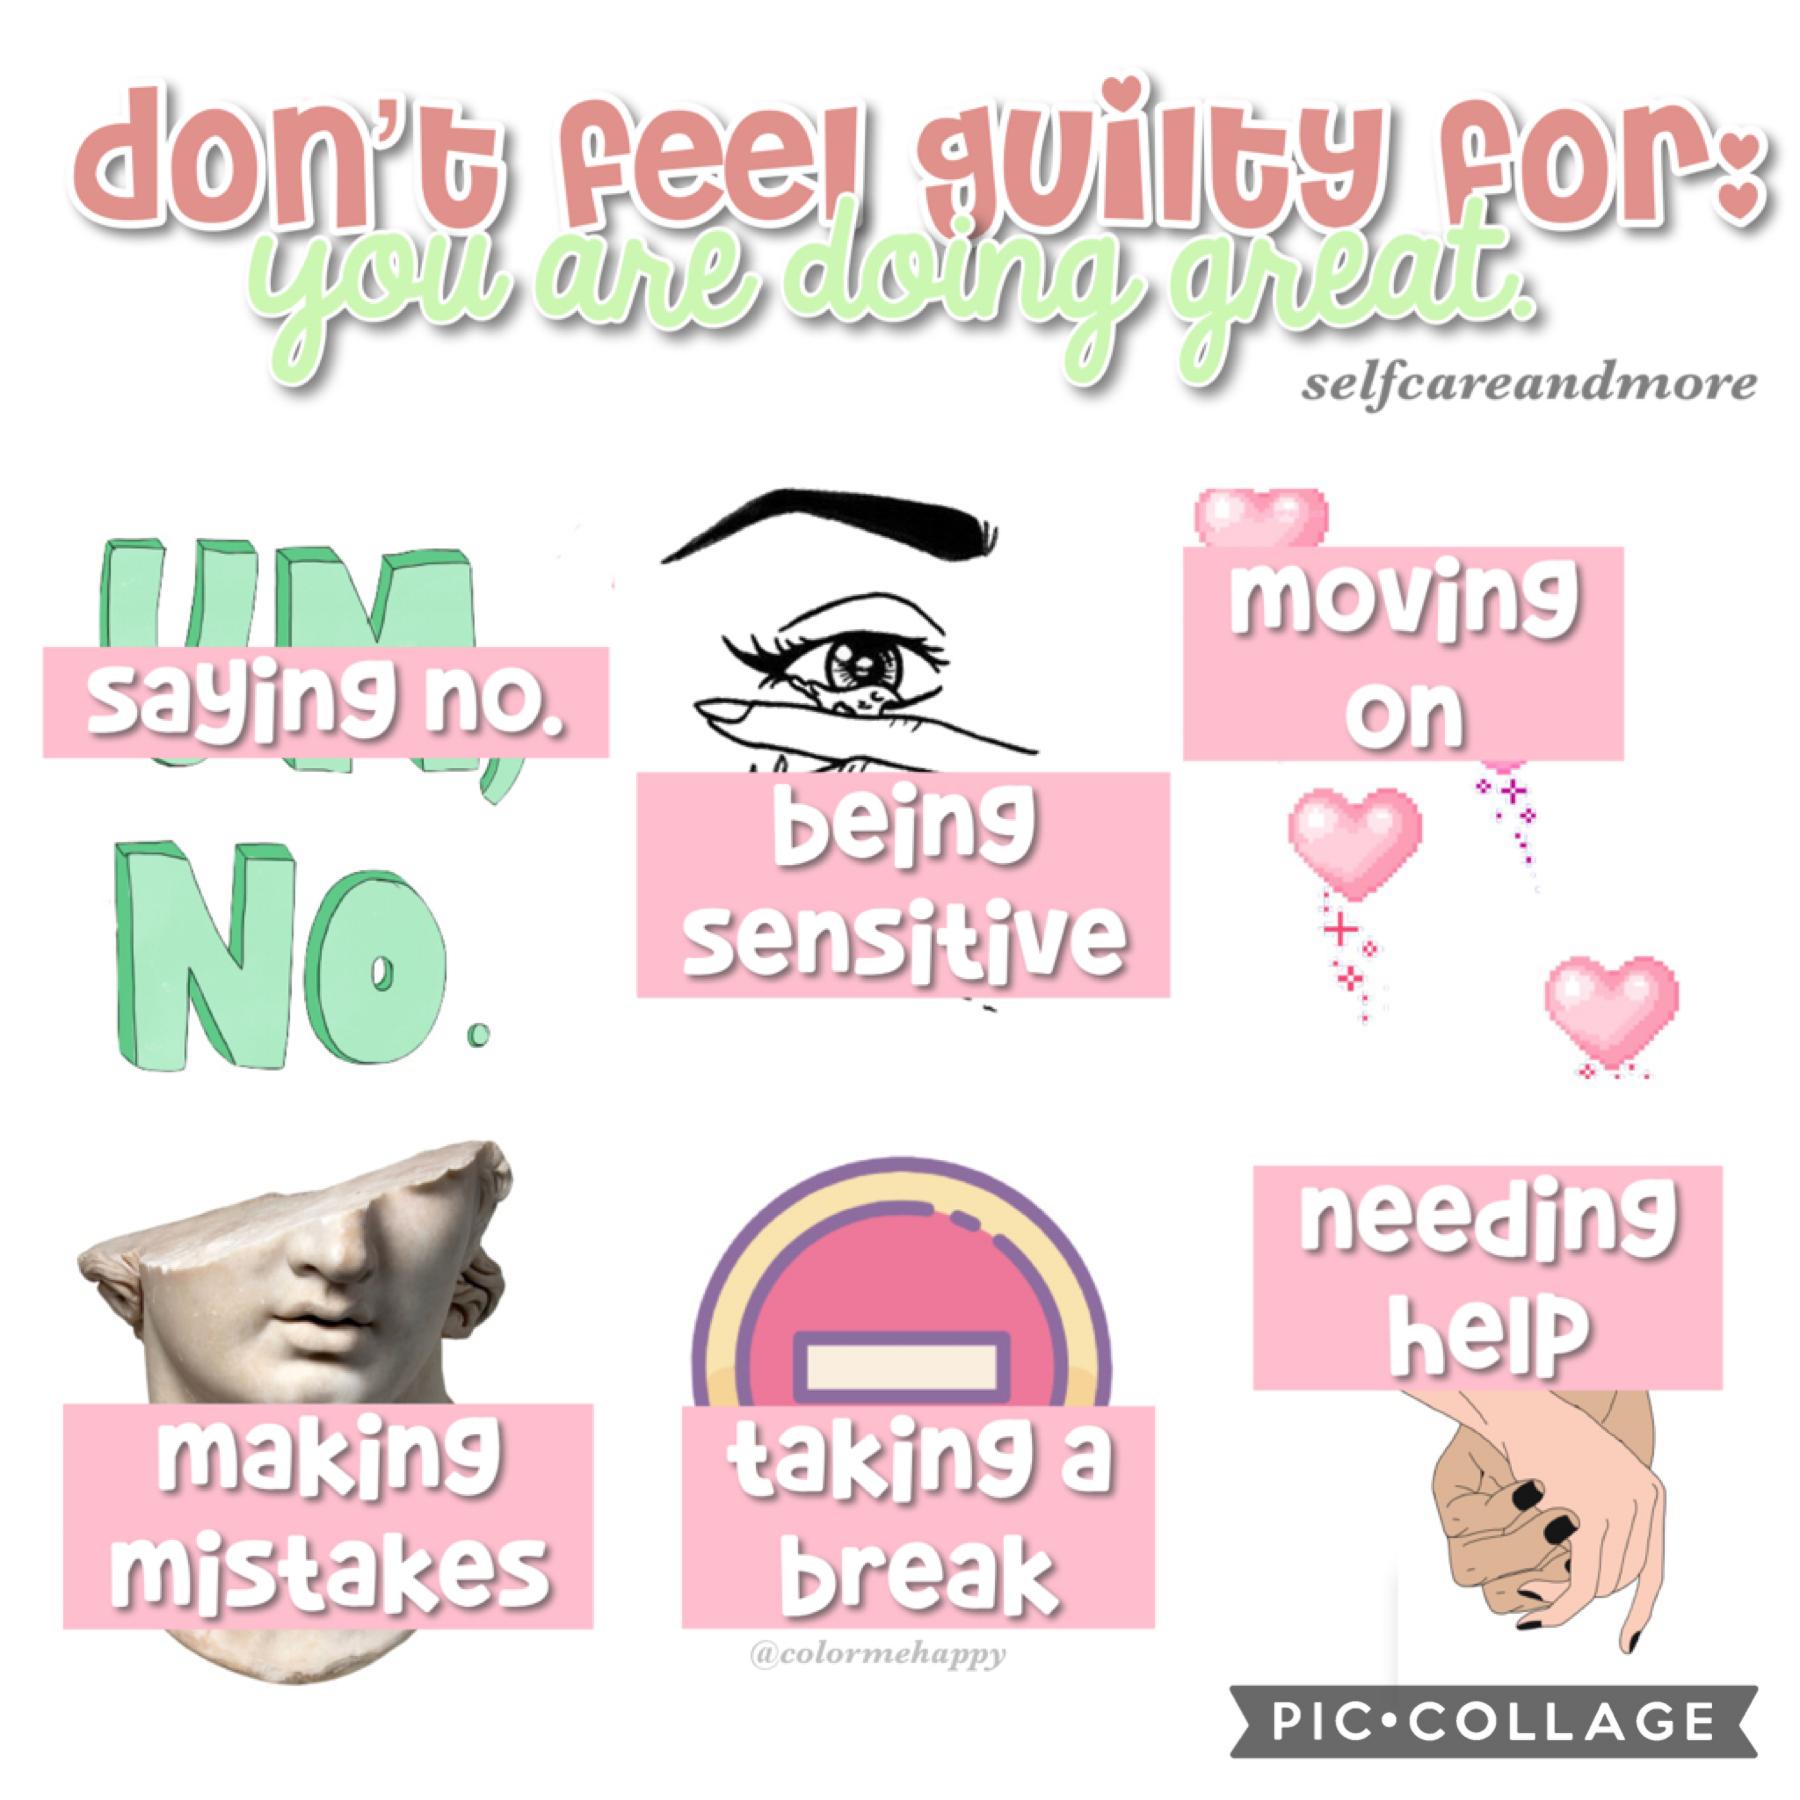 🛑tappers🛑
Don’t feel guilty for
ANY of these!
This just means that
you are healing and
becoming better,
and that’s awesome! 
🛑 🛑 🛑 